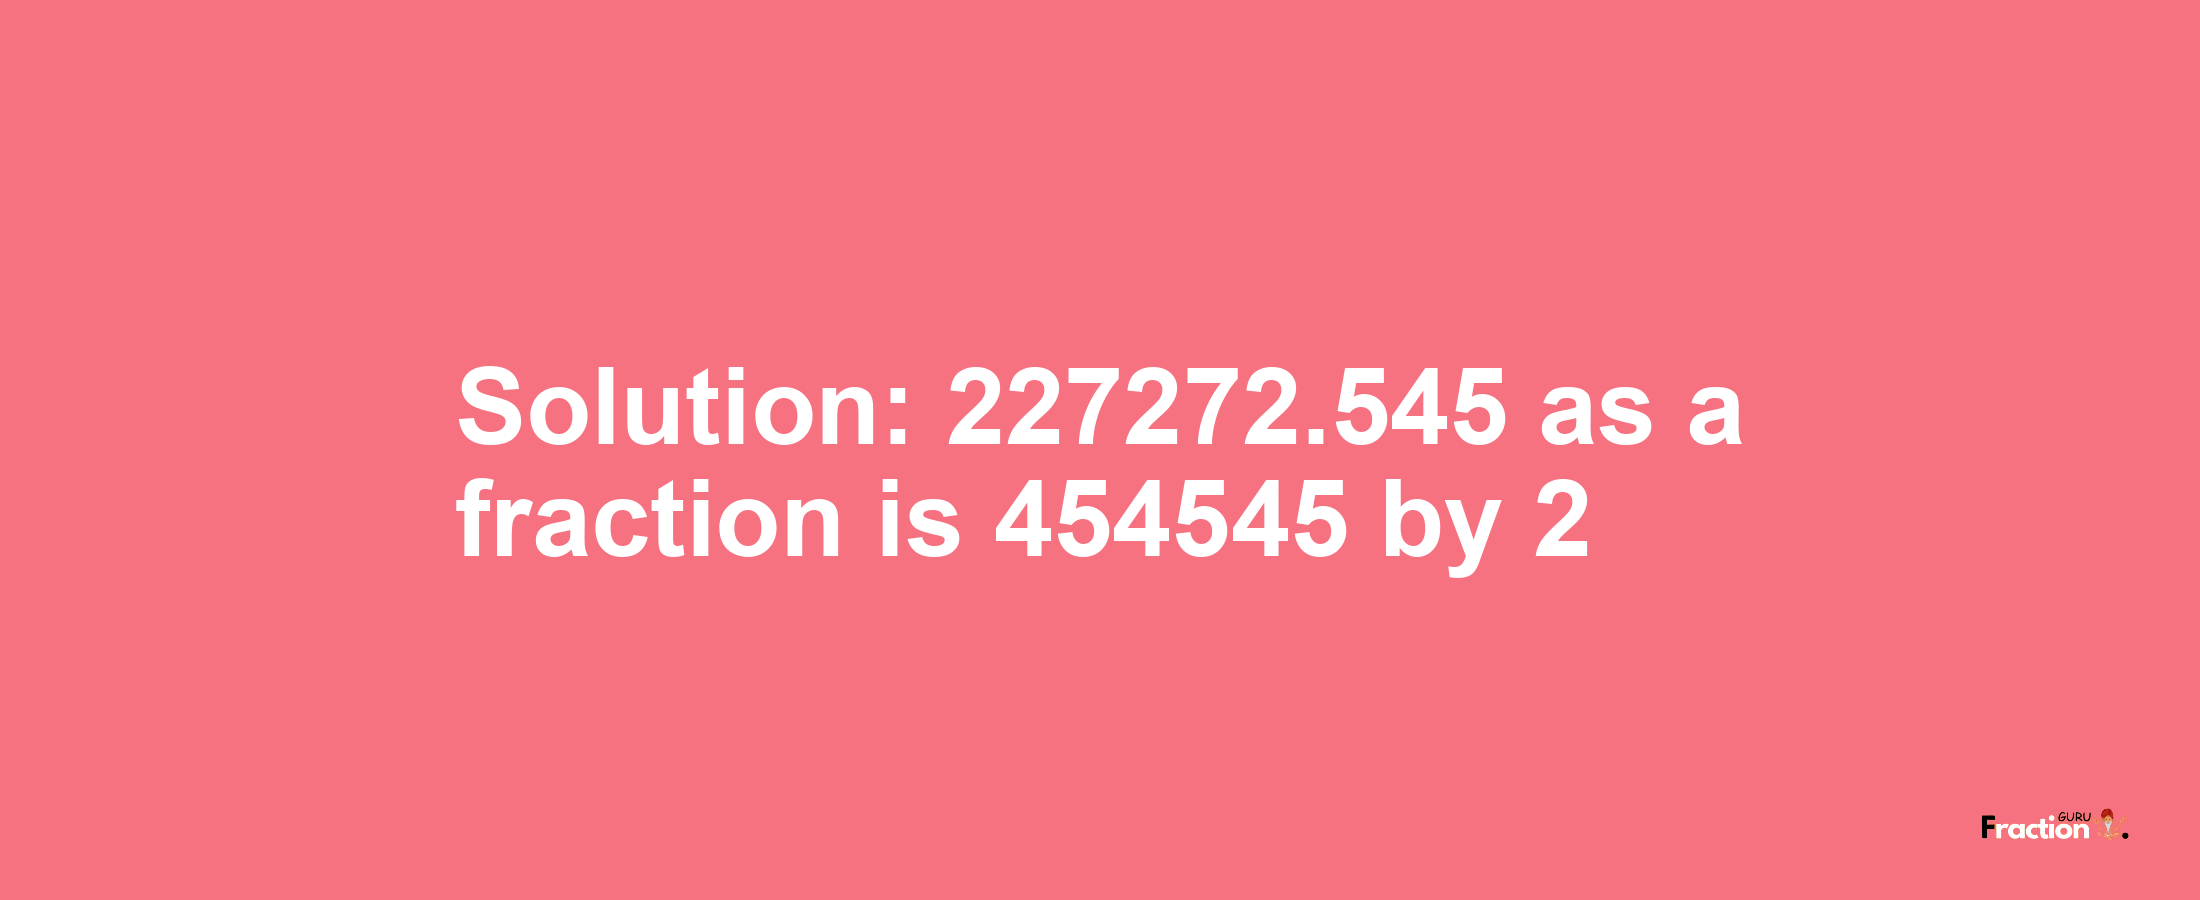 Solution:227272.545 as a fraction is 454545/2